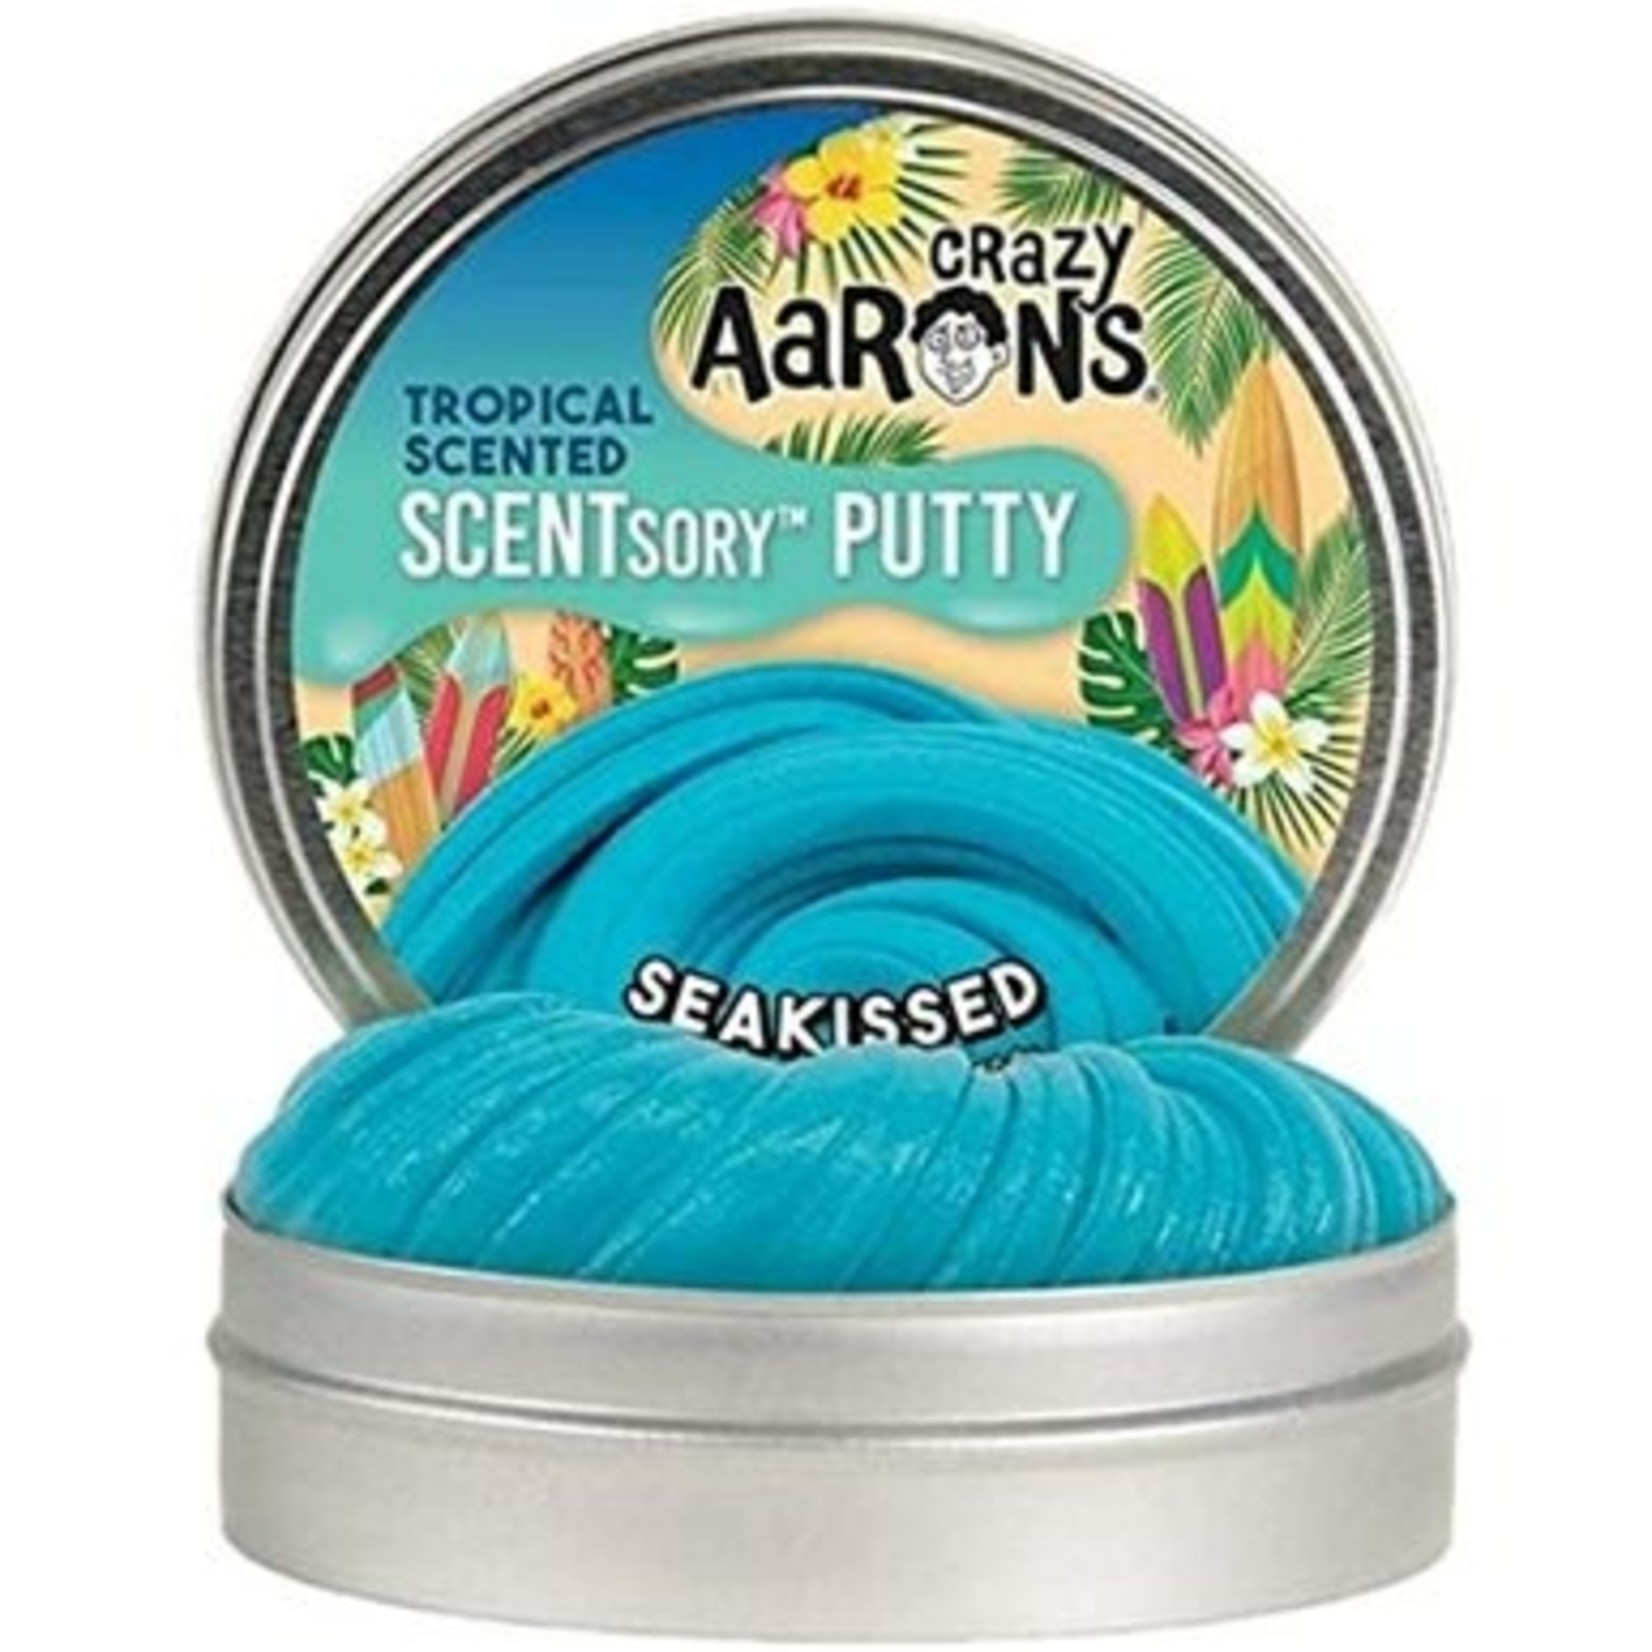 Crazy Aaron's Crazy Aaron's Scentsory Seakissed - 2.75" Thinking Putty Tin